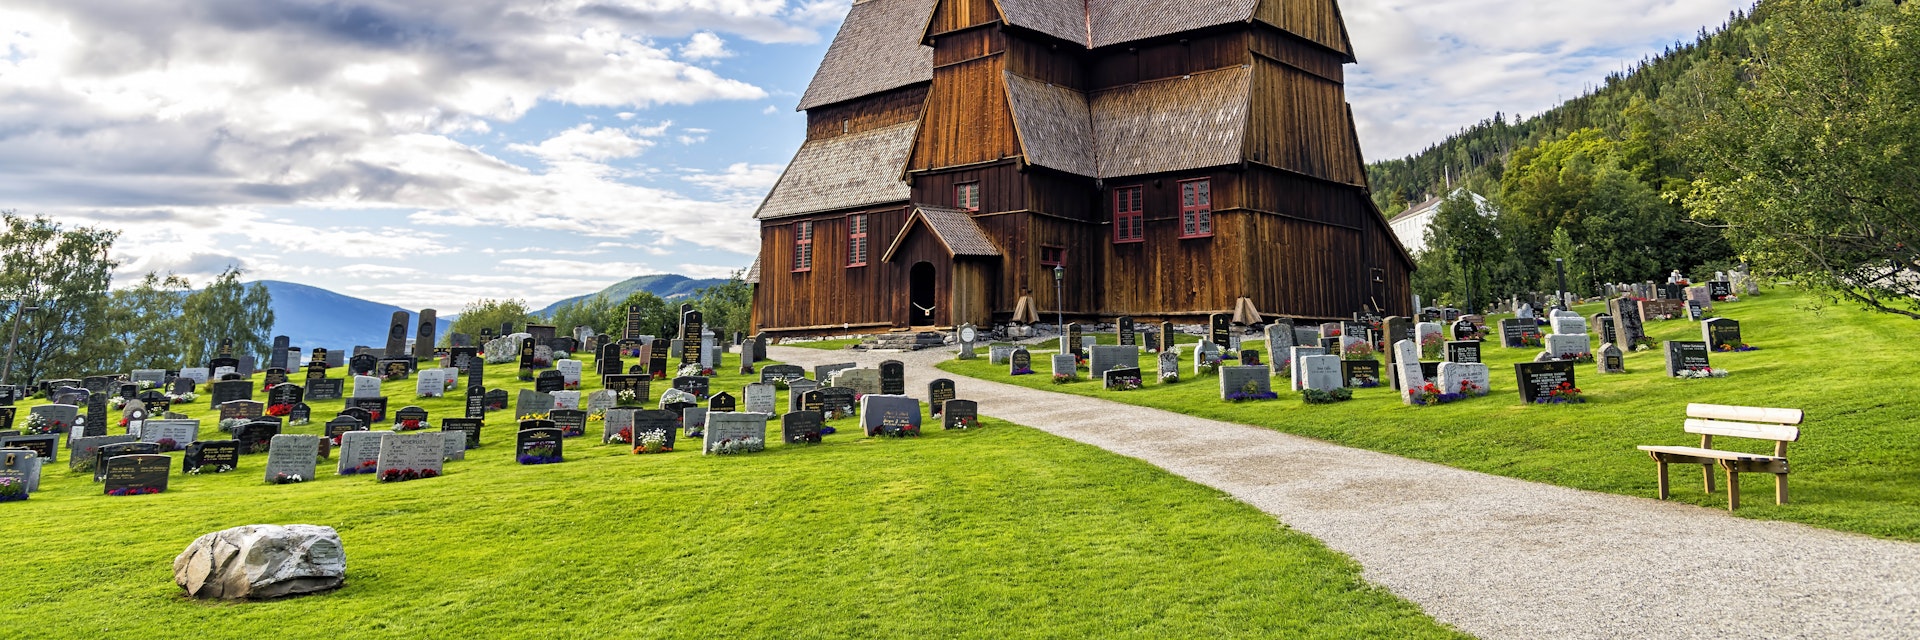 Ringebu Stave Church in Norway. Built in the first quarter of the 13th century, is one of 28 surviving stave churches and one of the largest. 